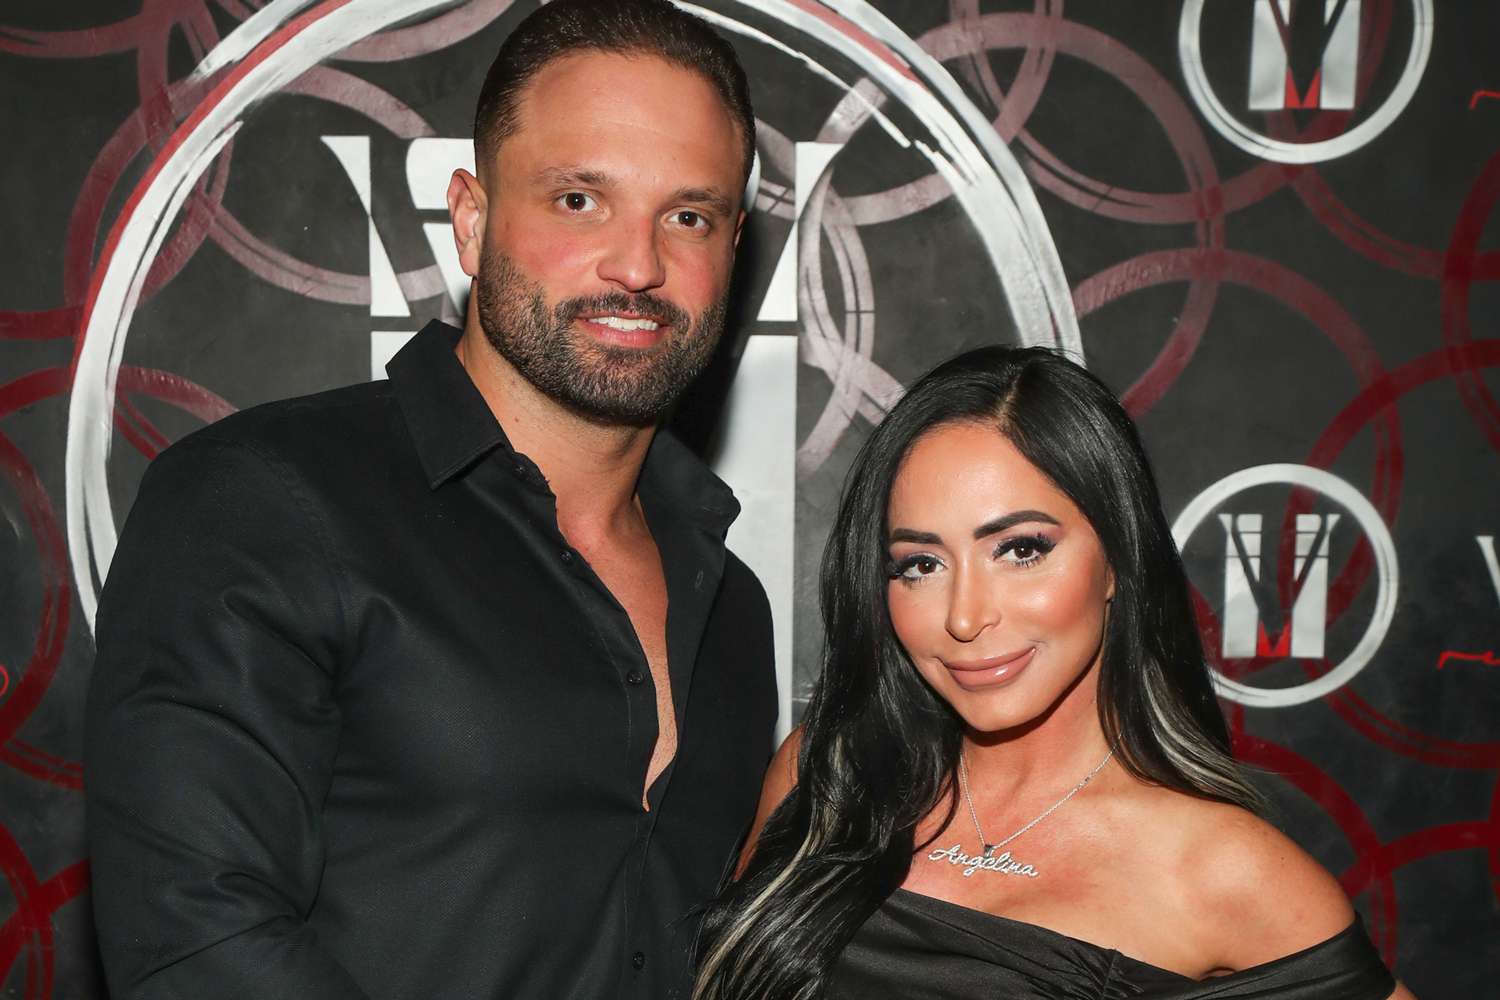 NFL Player’s Wife Expresses Anger Over ‘Jersey Shore’s’ Angelina Pivarnick Sliding Into Her Husband’s DMs